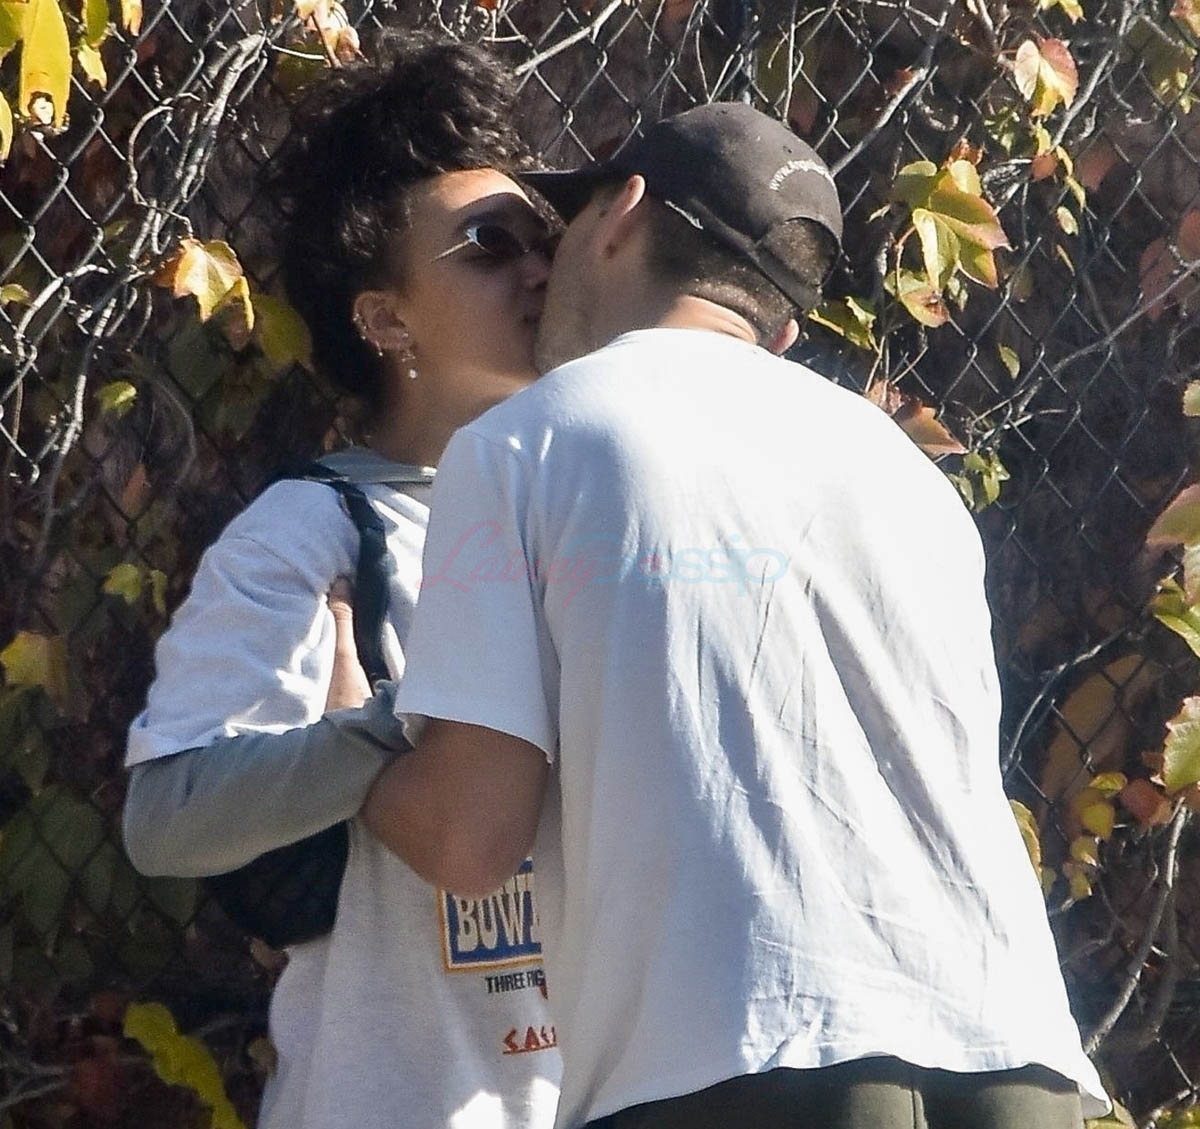 Shia Labeouf And Fka Twigs Kissing In Public In Matching Outfits